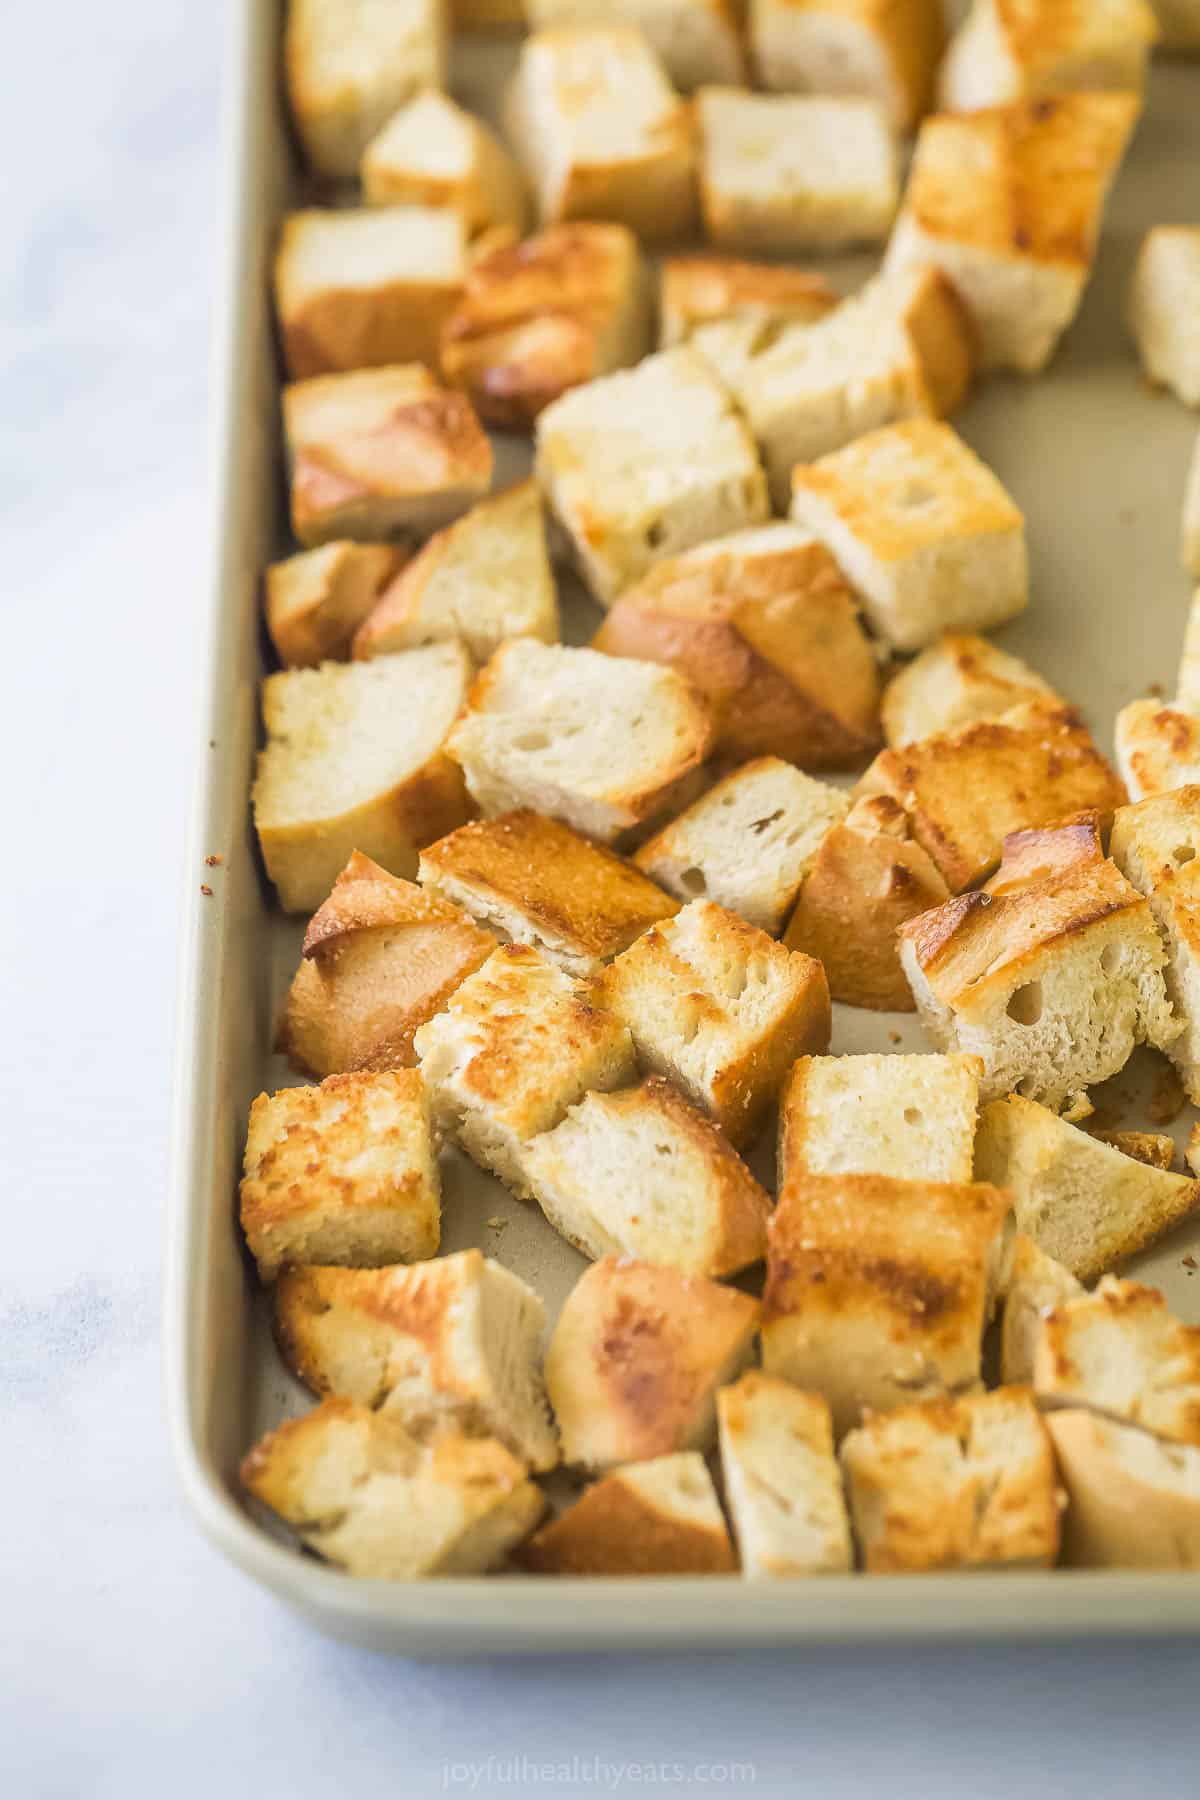 A close-up shot of homemade croutons on a metal baking sheet with a raised rim